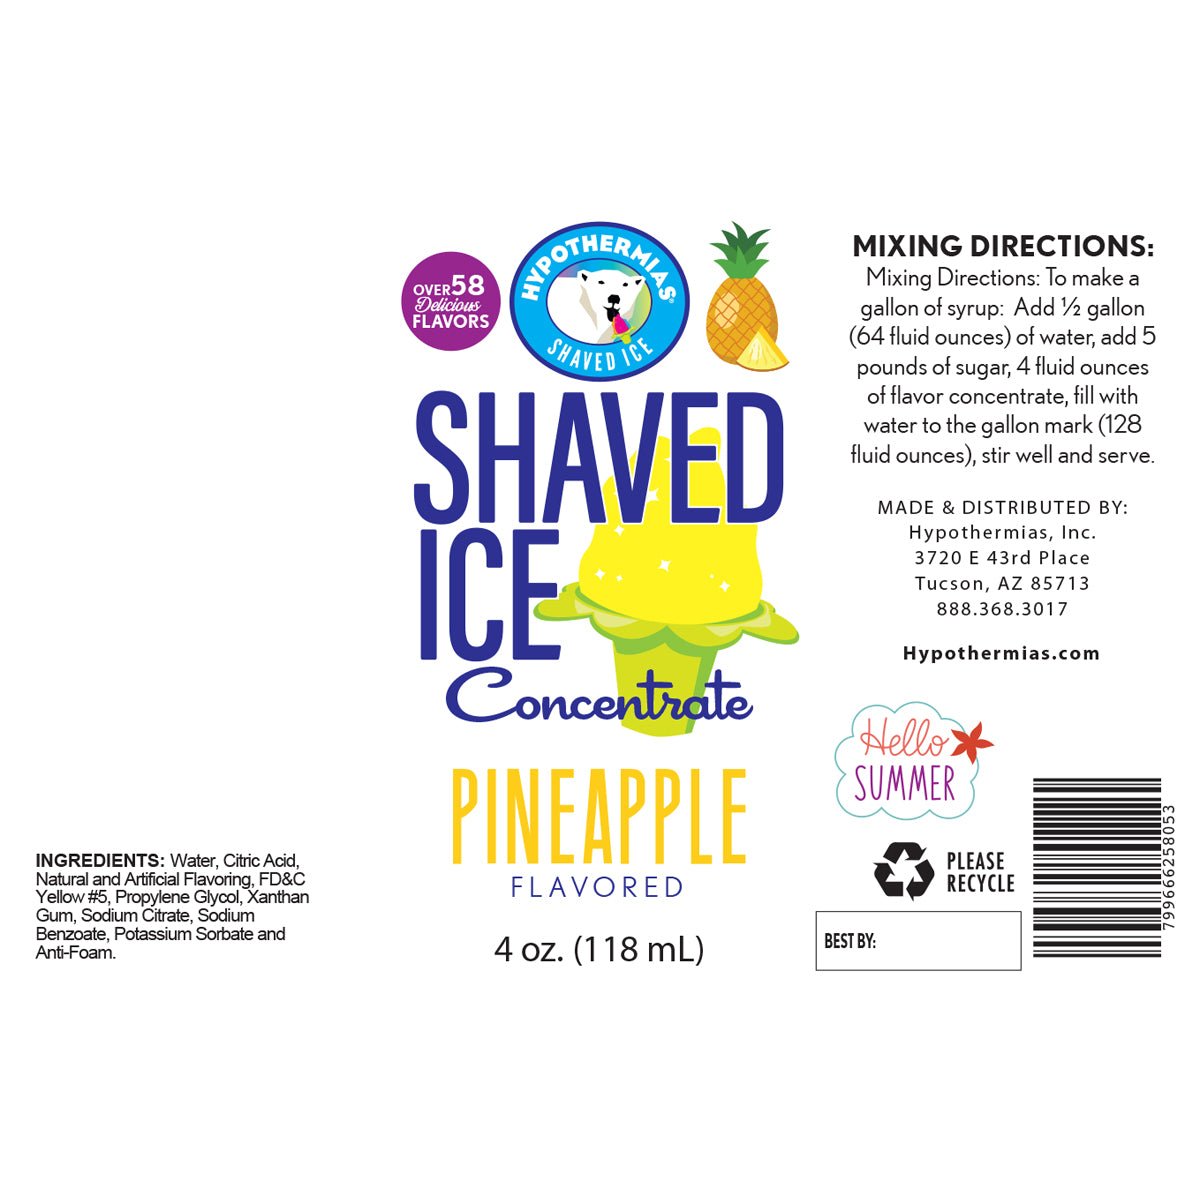 Hypothermias pineapple shaved ice or snow cone flavor syrup concentrate ingredient label